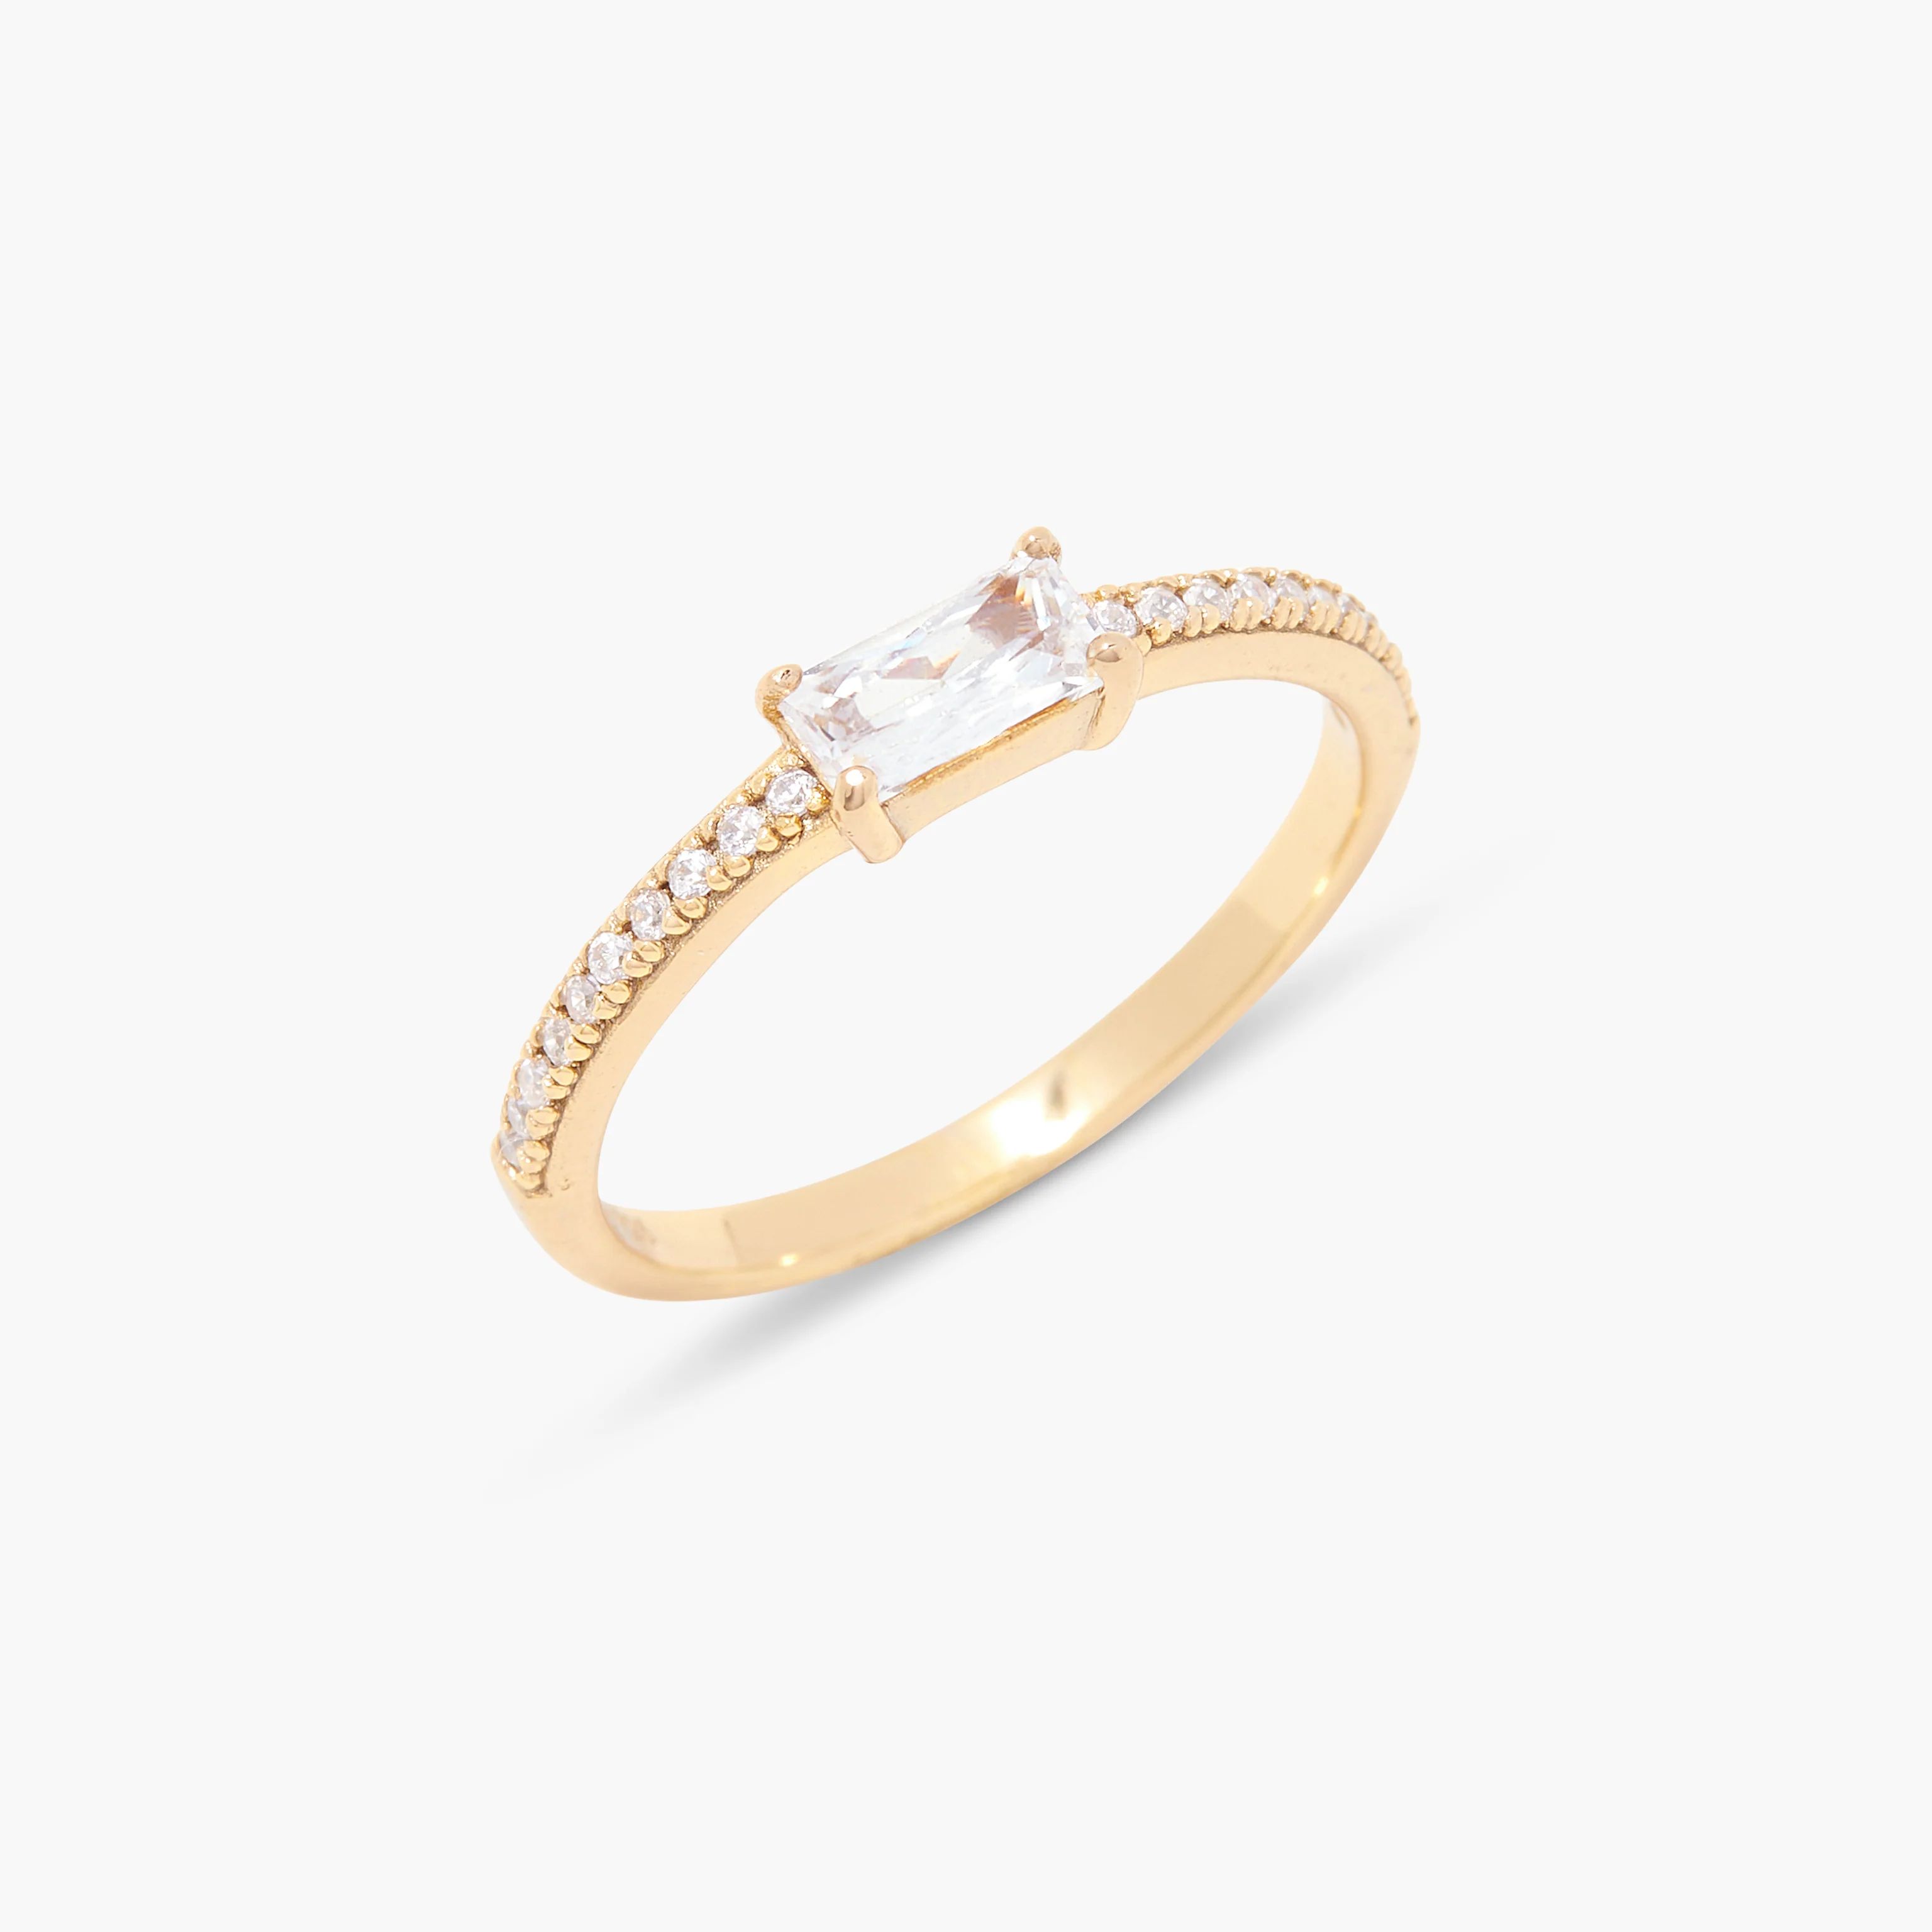 Blythe Ring | Brook and York